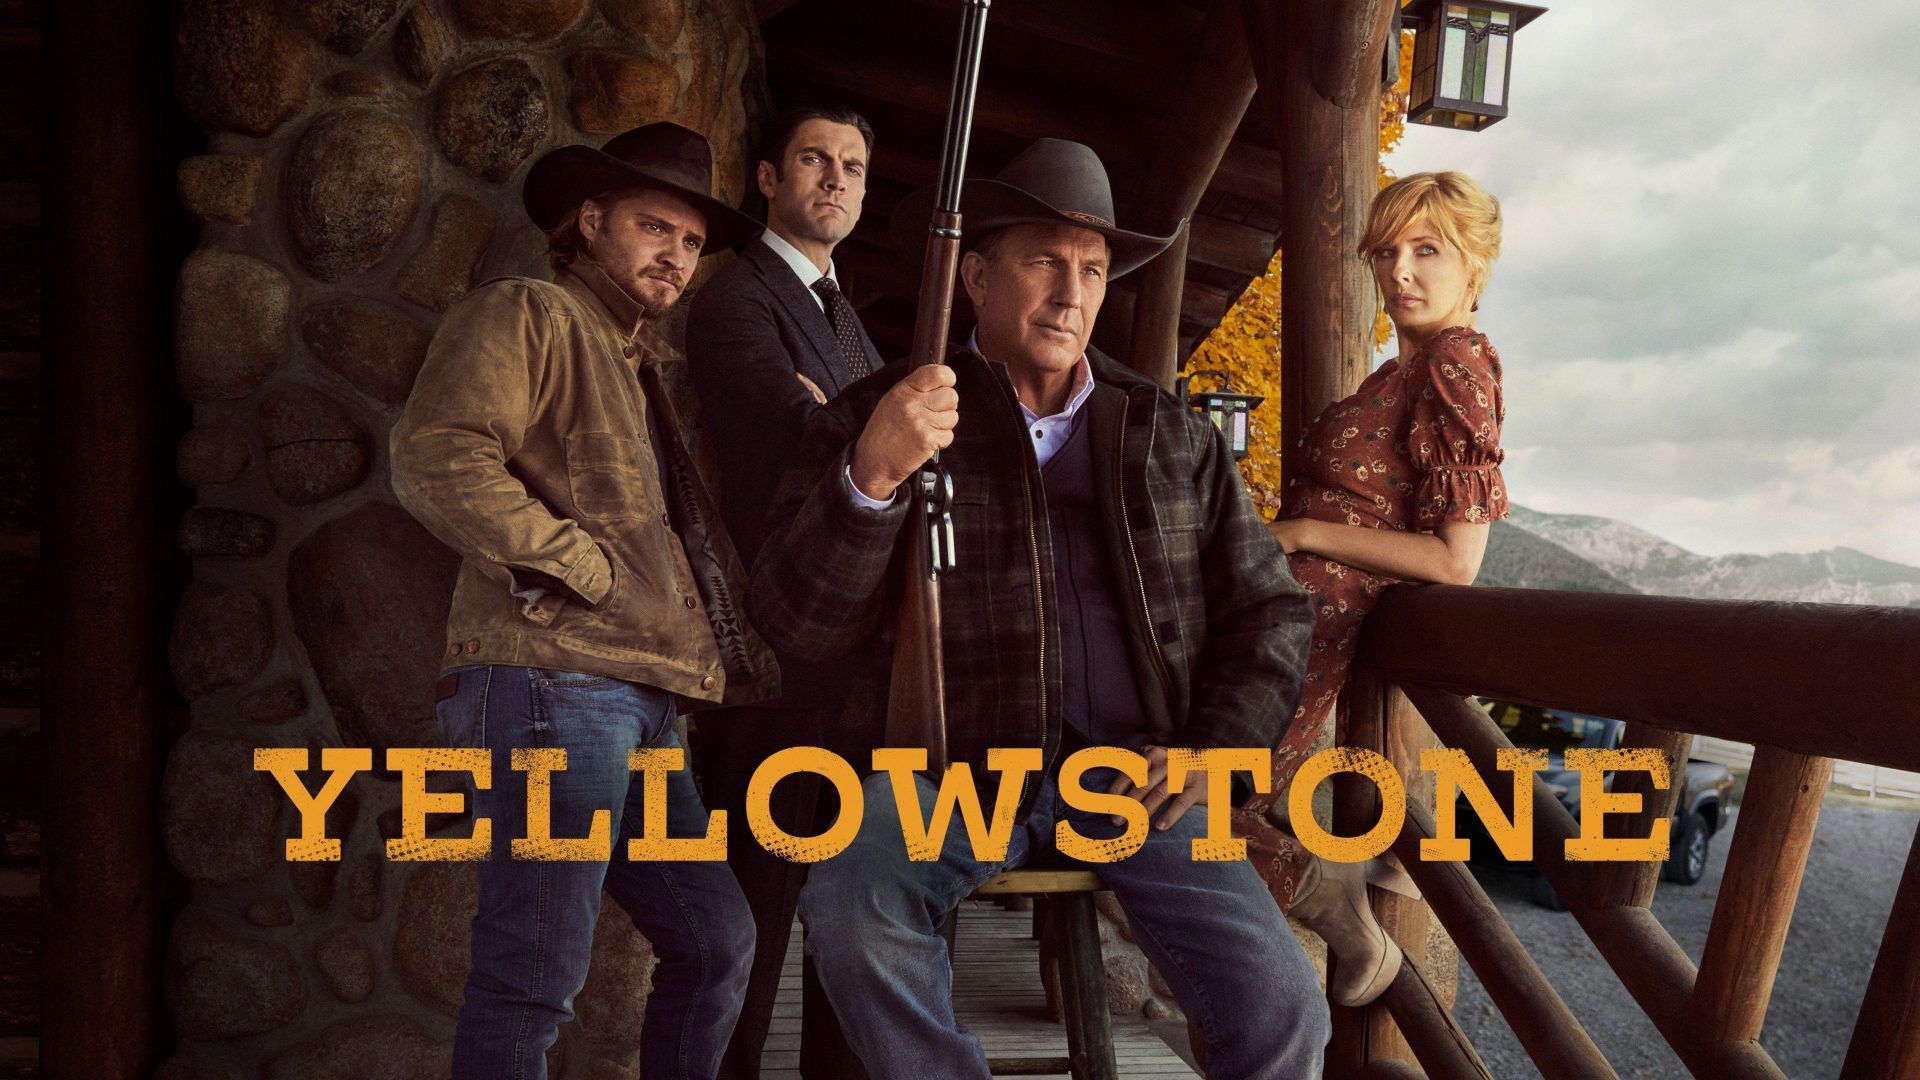 Yellowstone-Television-Show-from-Paramount Starring Cast